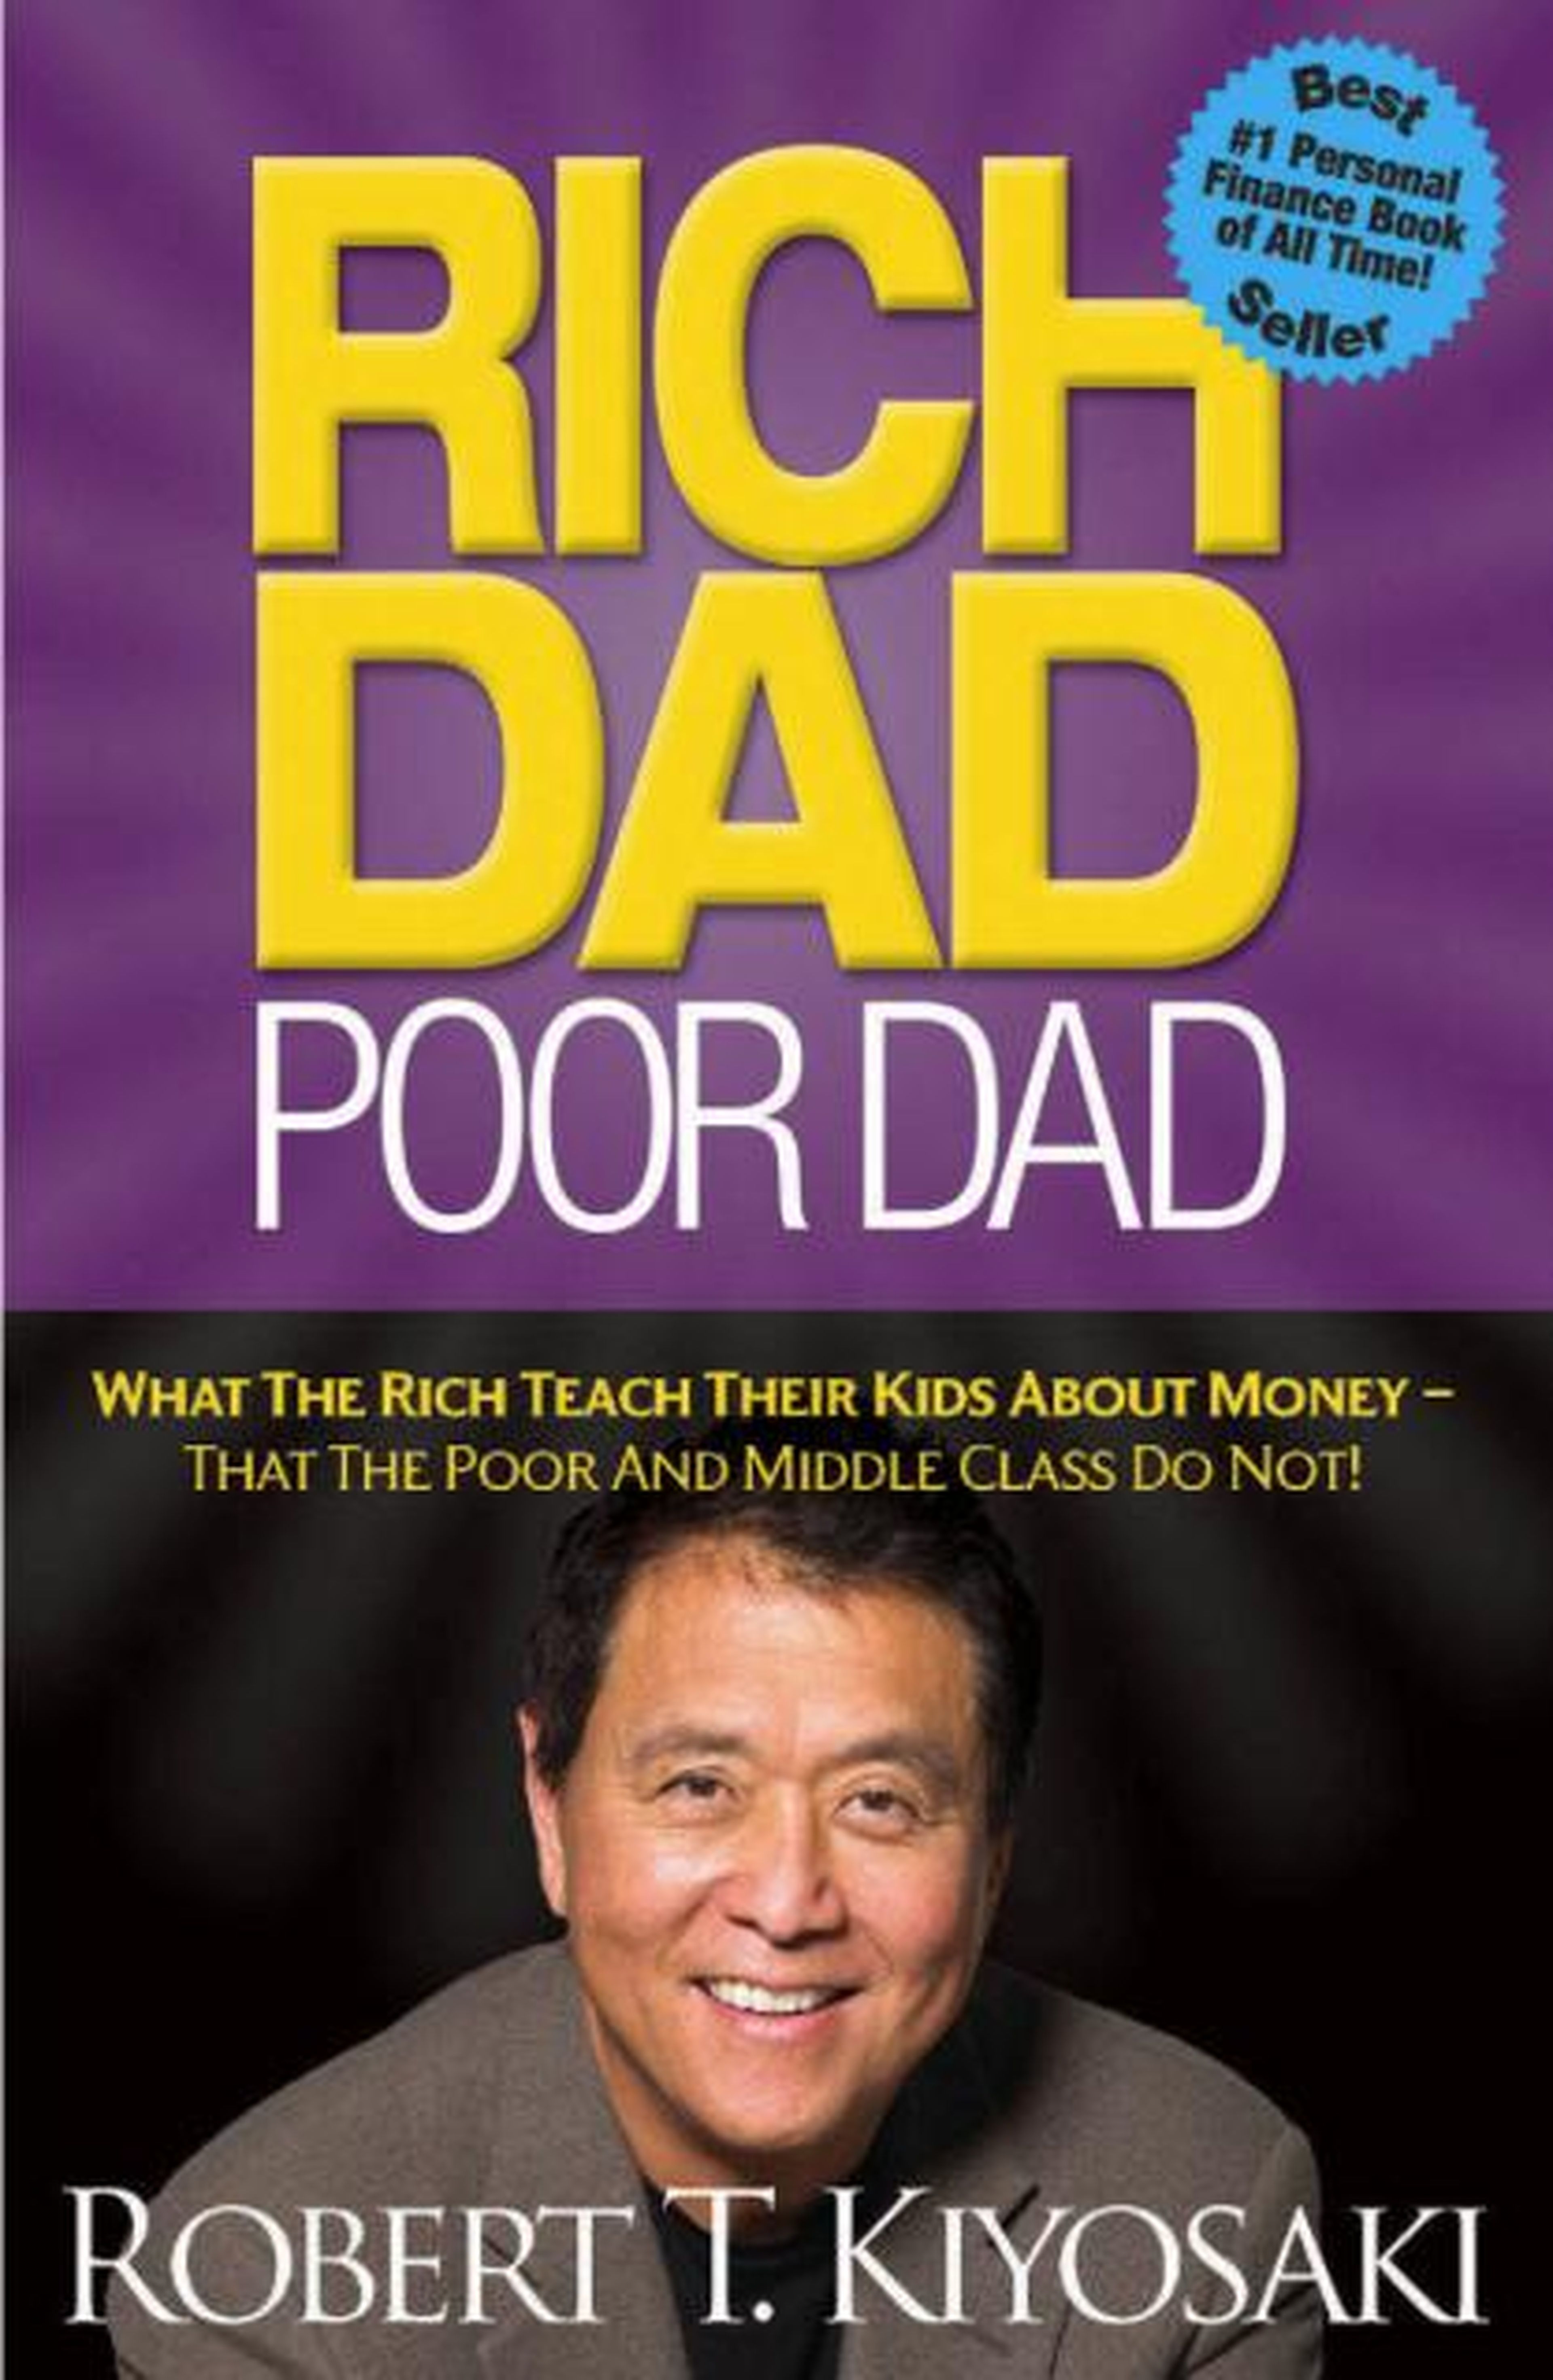 Kiyosaki outlines important money lessons he learned from important figures in his life.